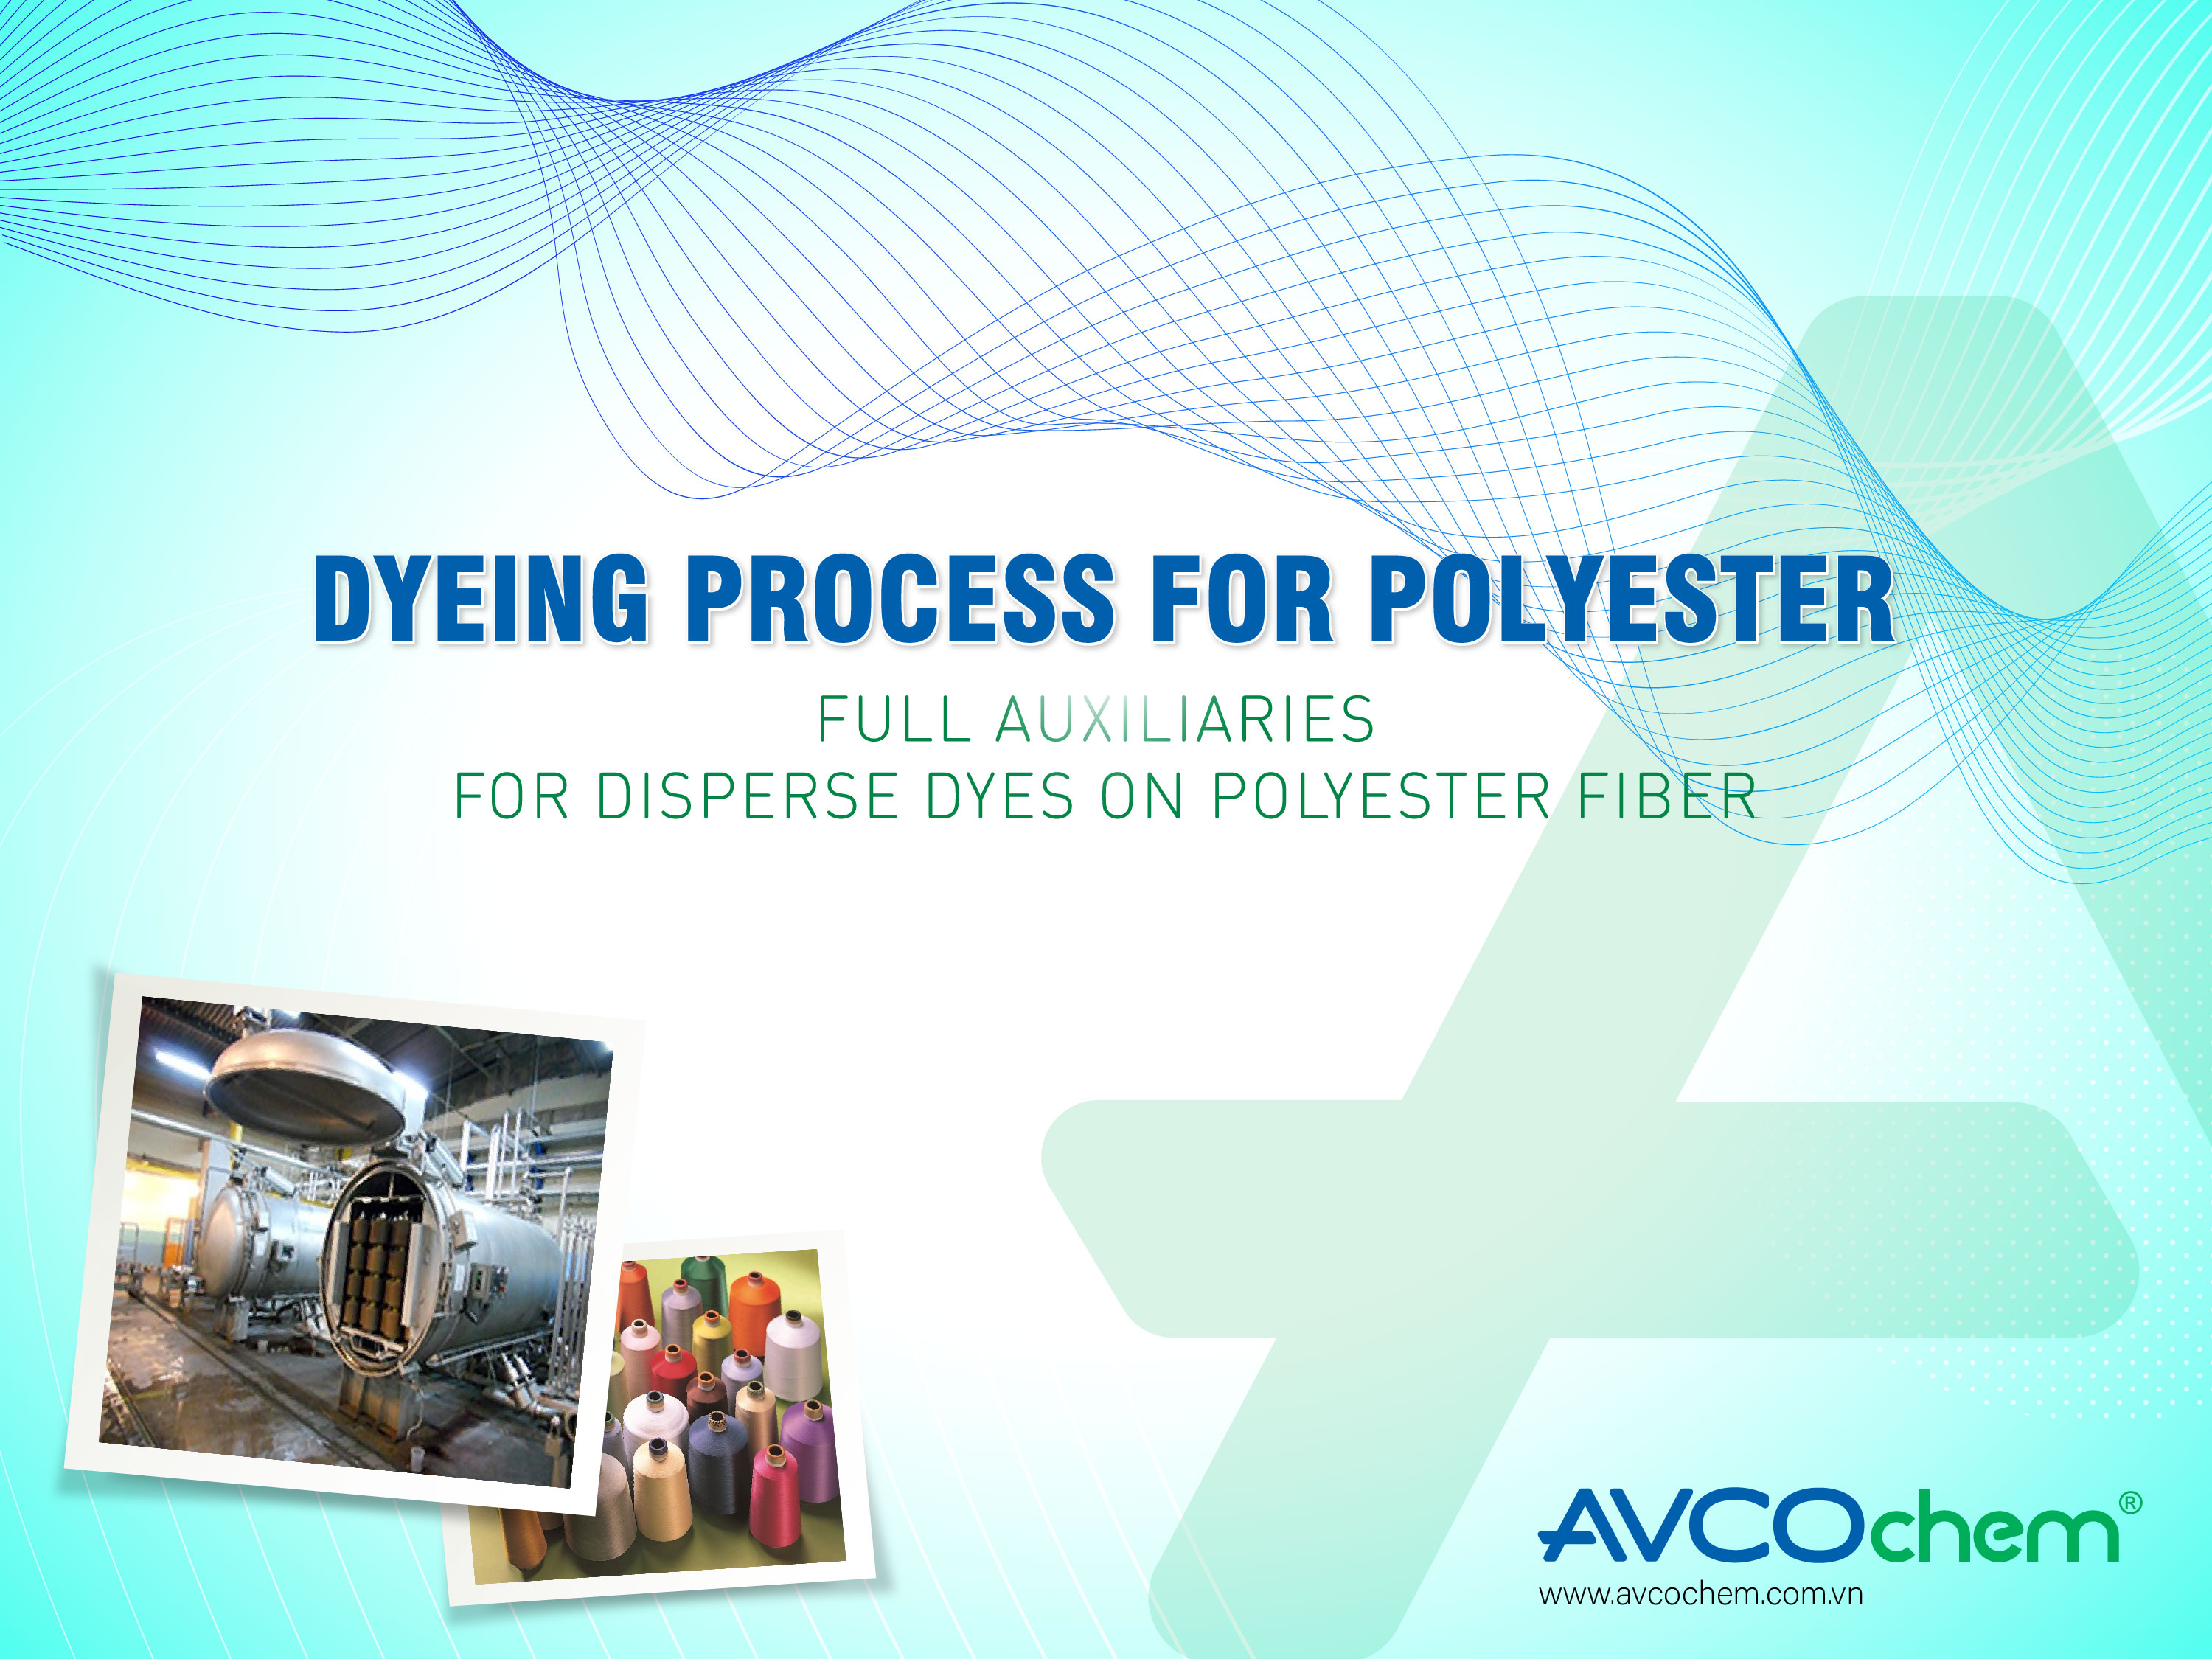 DYEING PROCESS FOR POLYESTER